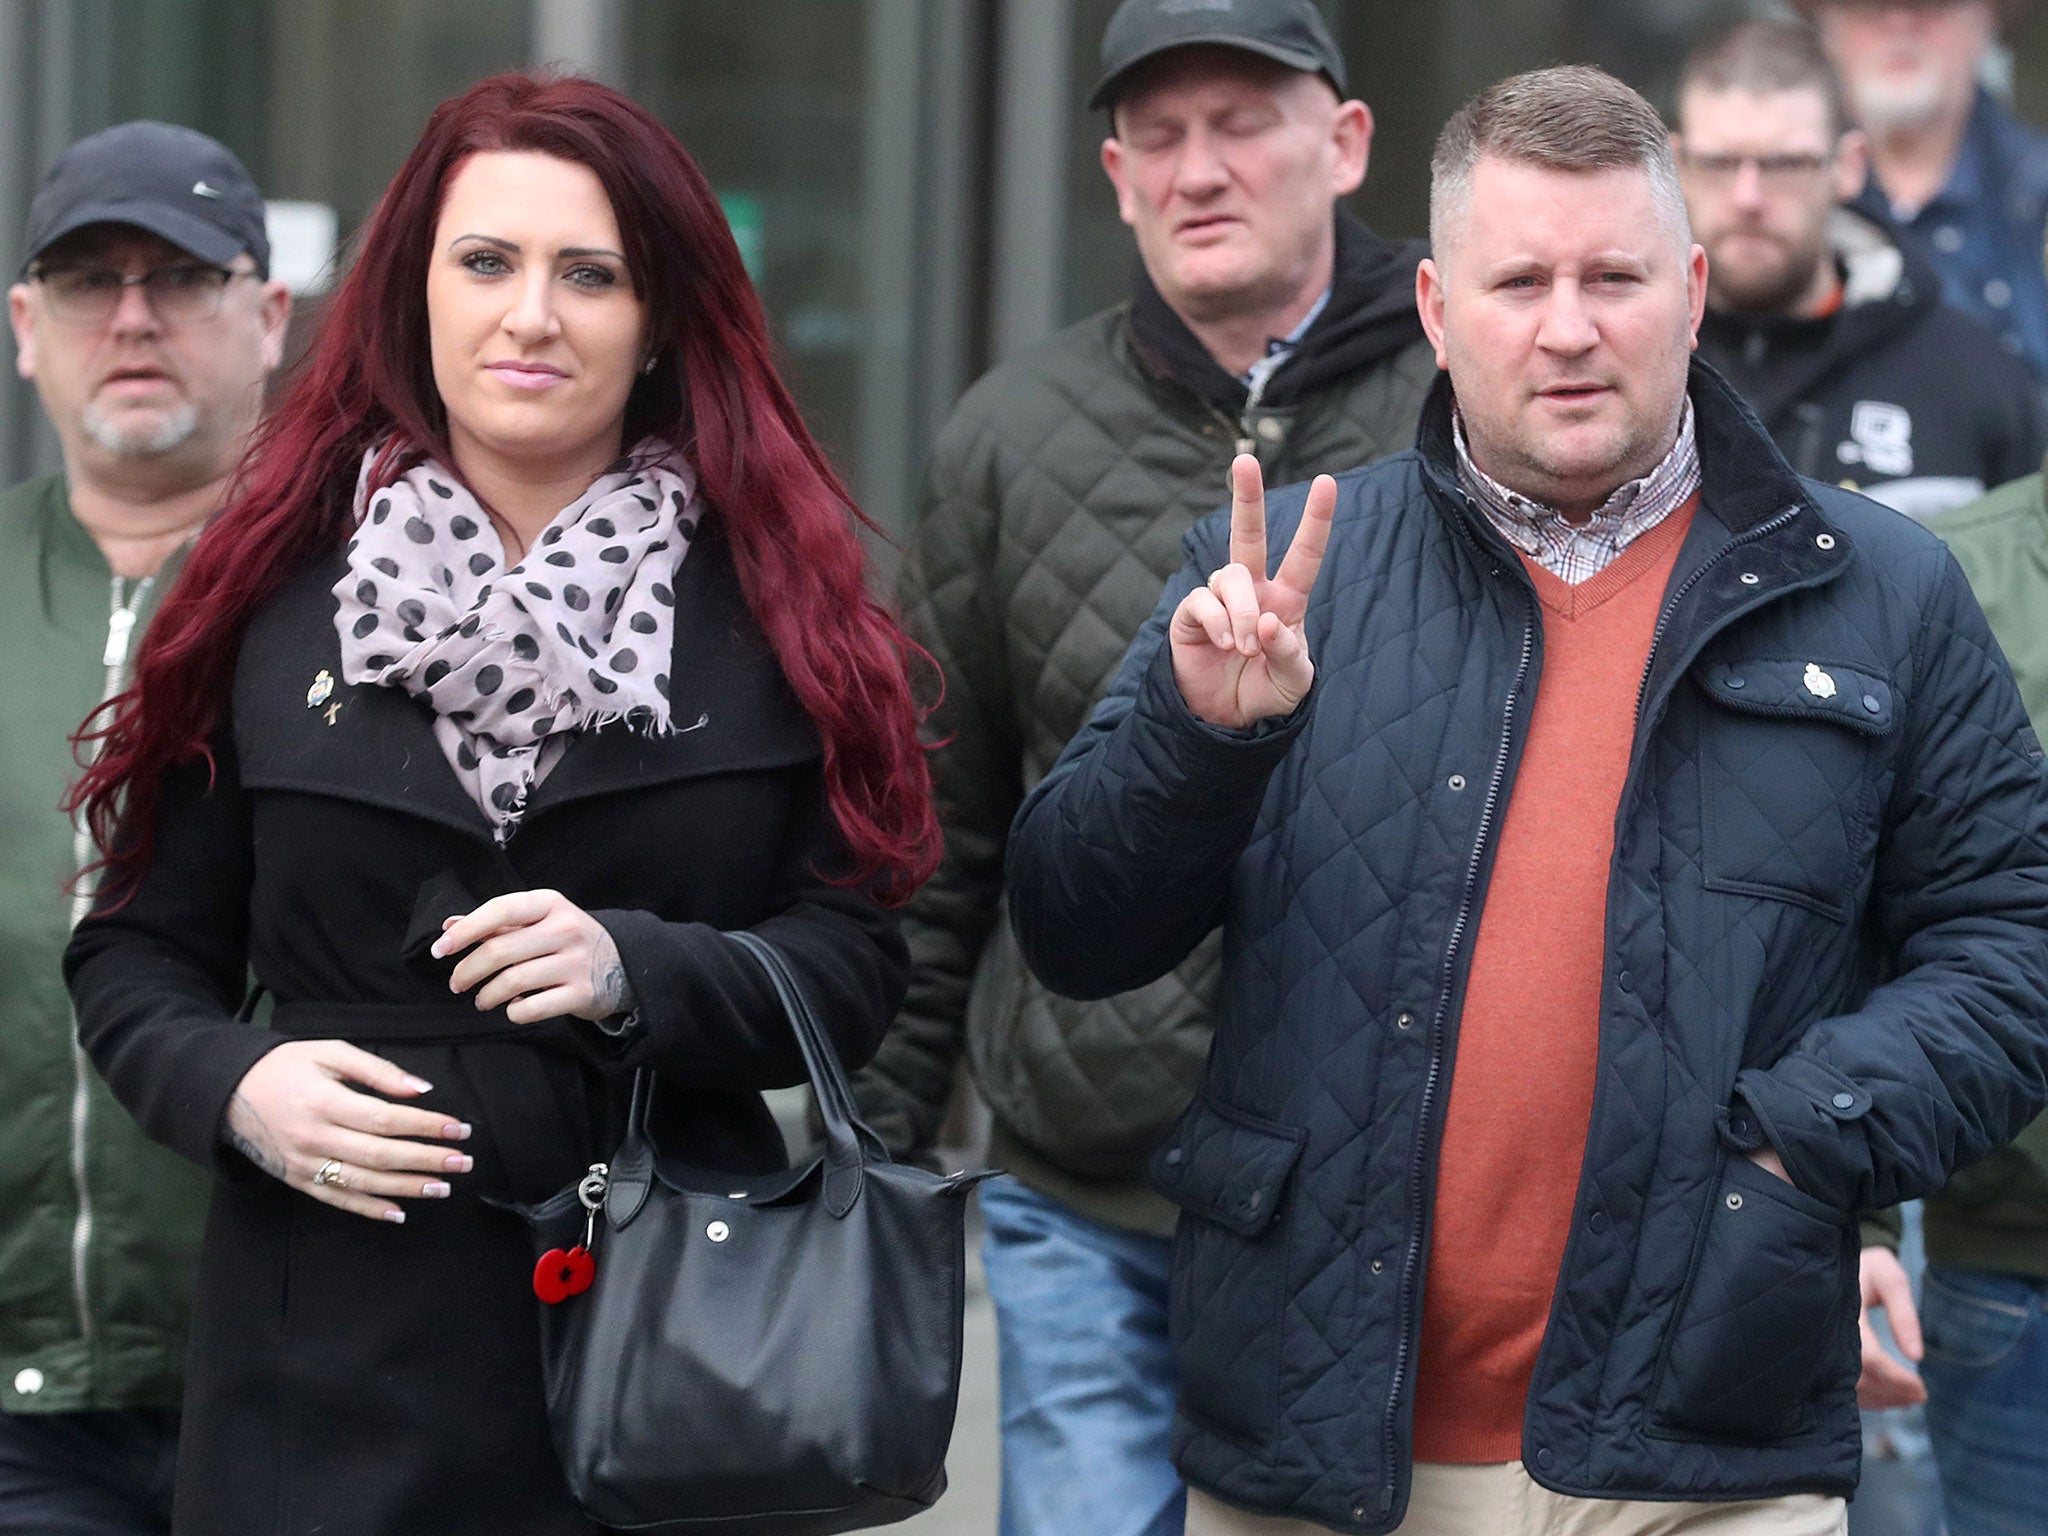 Britain First leader Paul Golding leaves Belfast Magisrates' Court alongside his Jayda Fransen and supporters after a hearing on 10 January